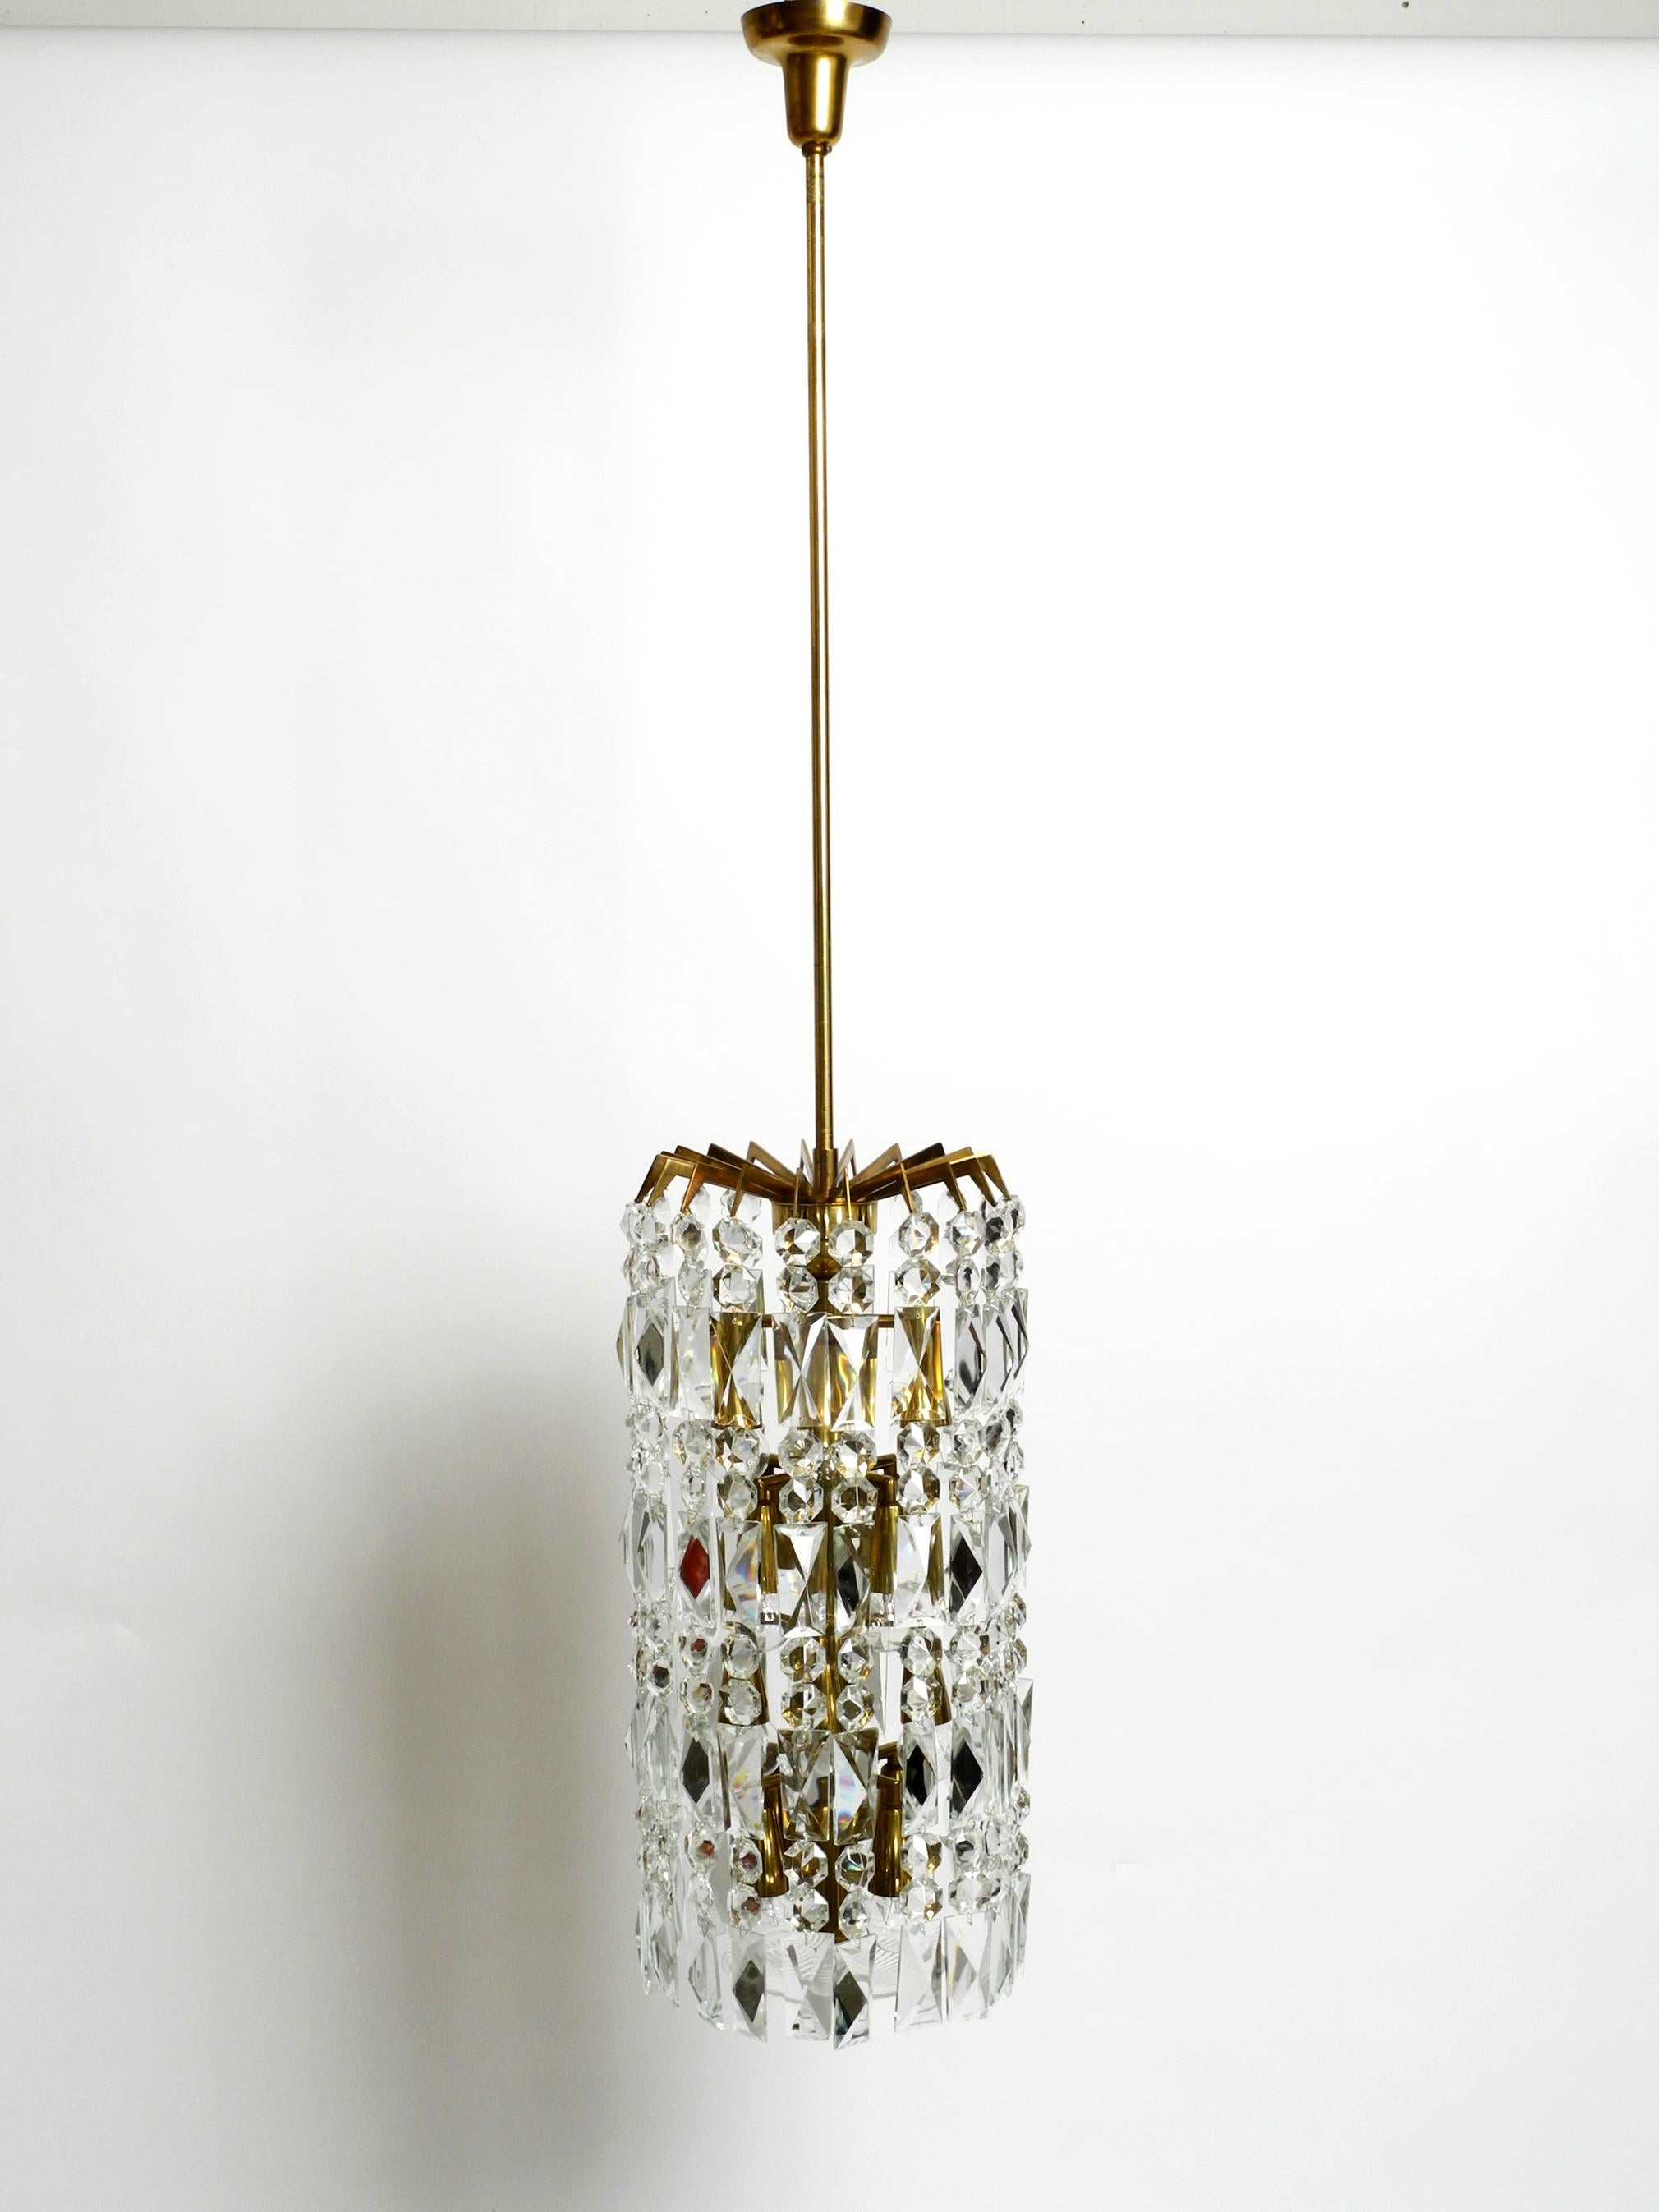 Very impressive beautiful rare Mid Century modern brass crystal glass chandelier. Manufactured in the 1960s by the Vereinigten Werkstätten.
There are 20 crystal glass stone chains hung in a circle.
Elaborate, very high-quality design with 16 E14